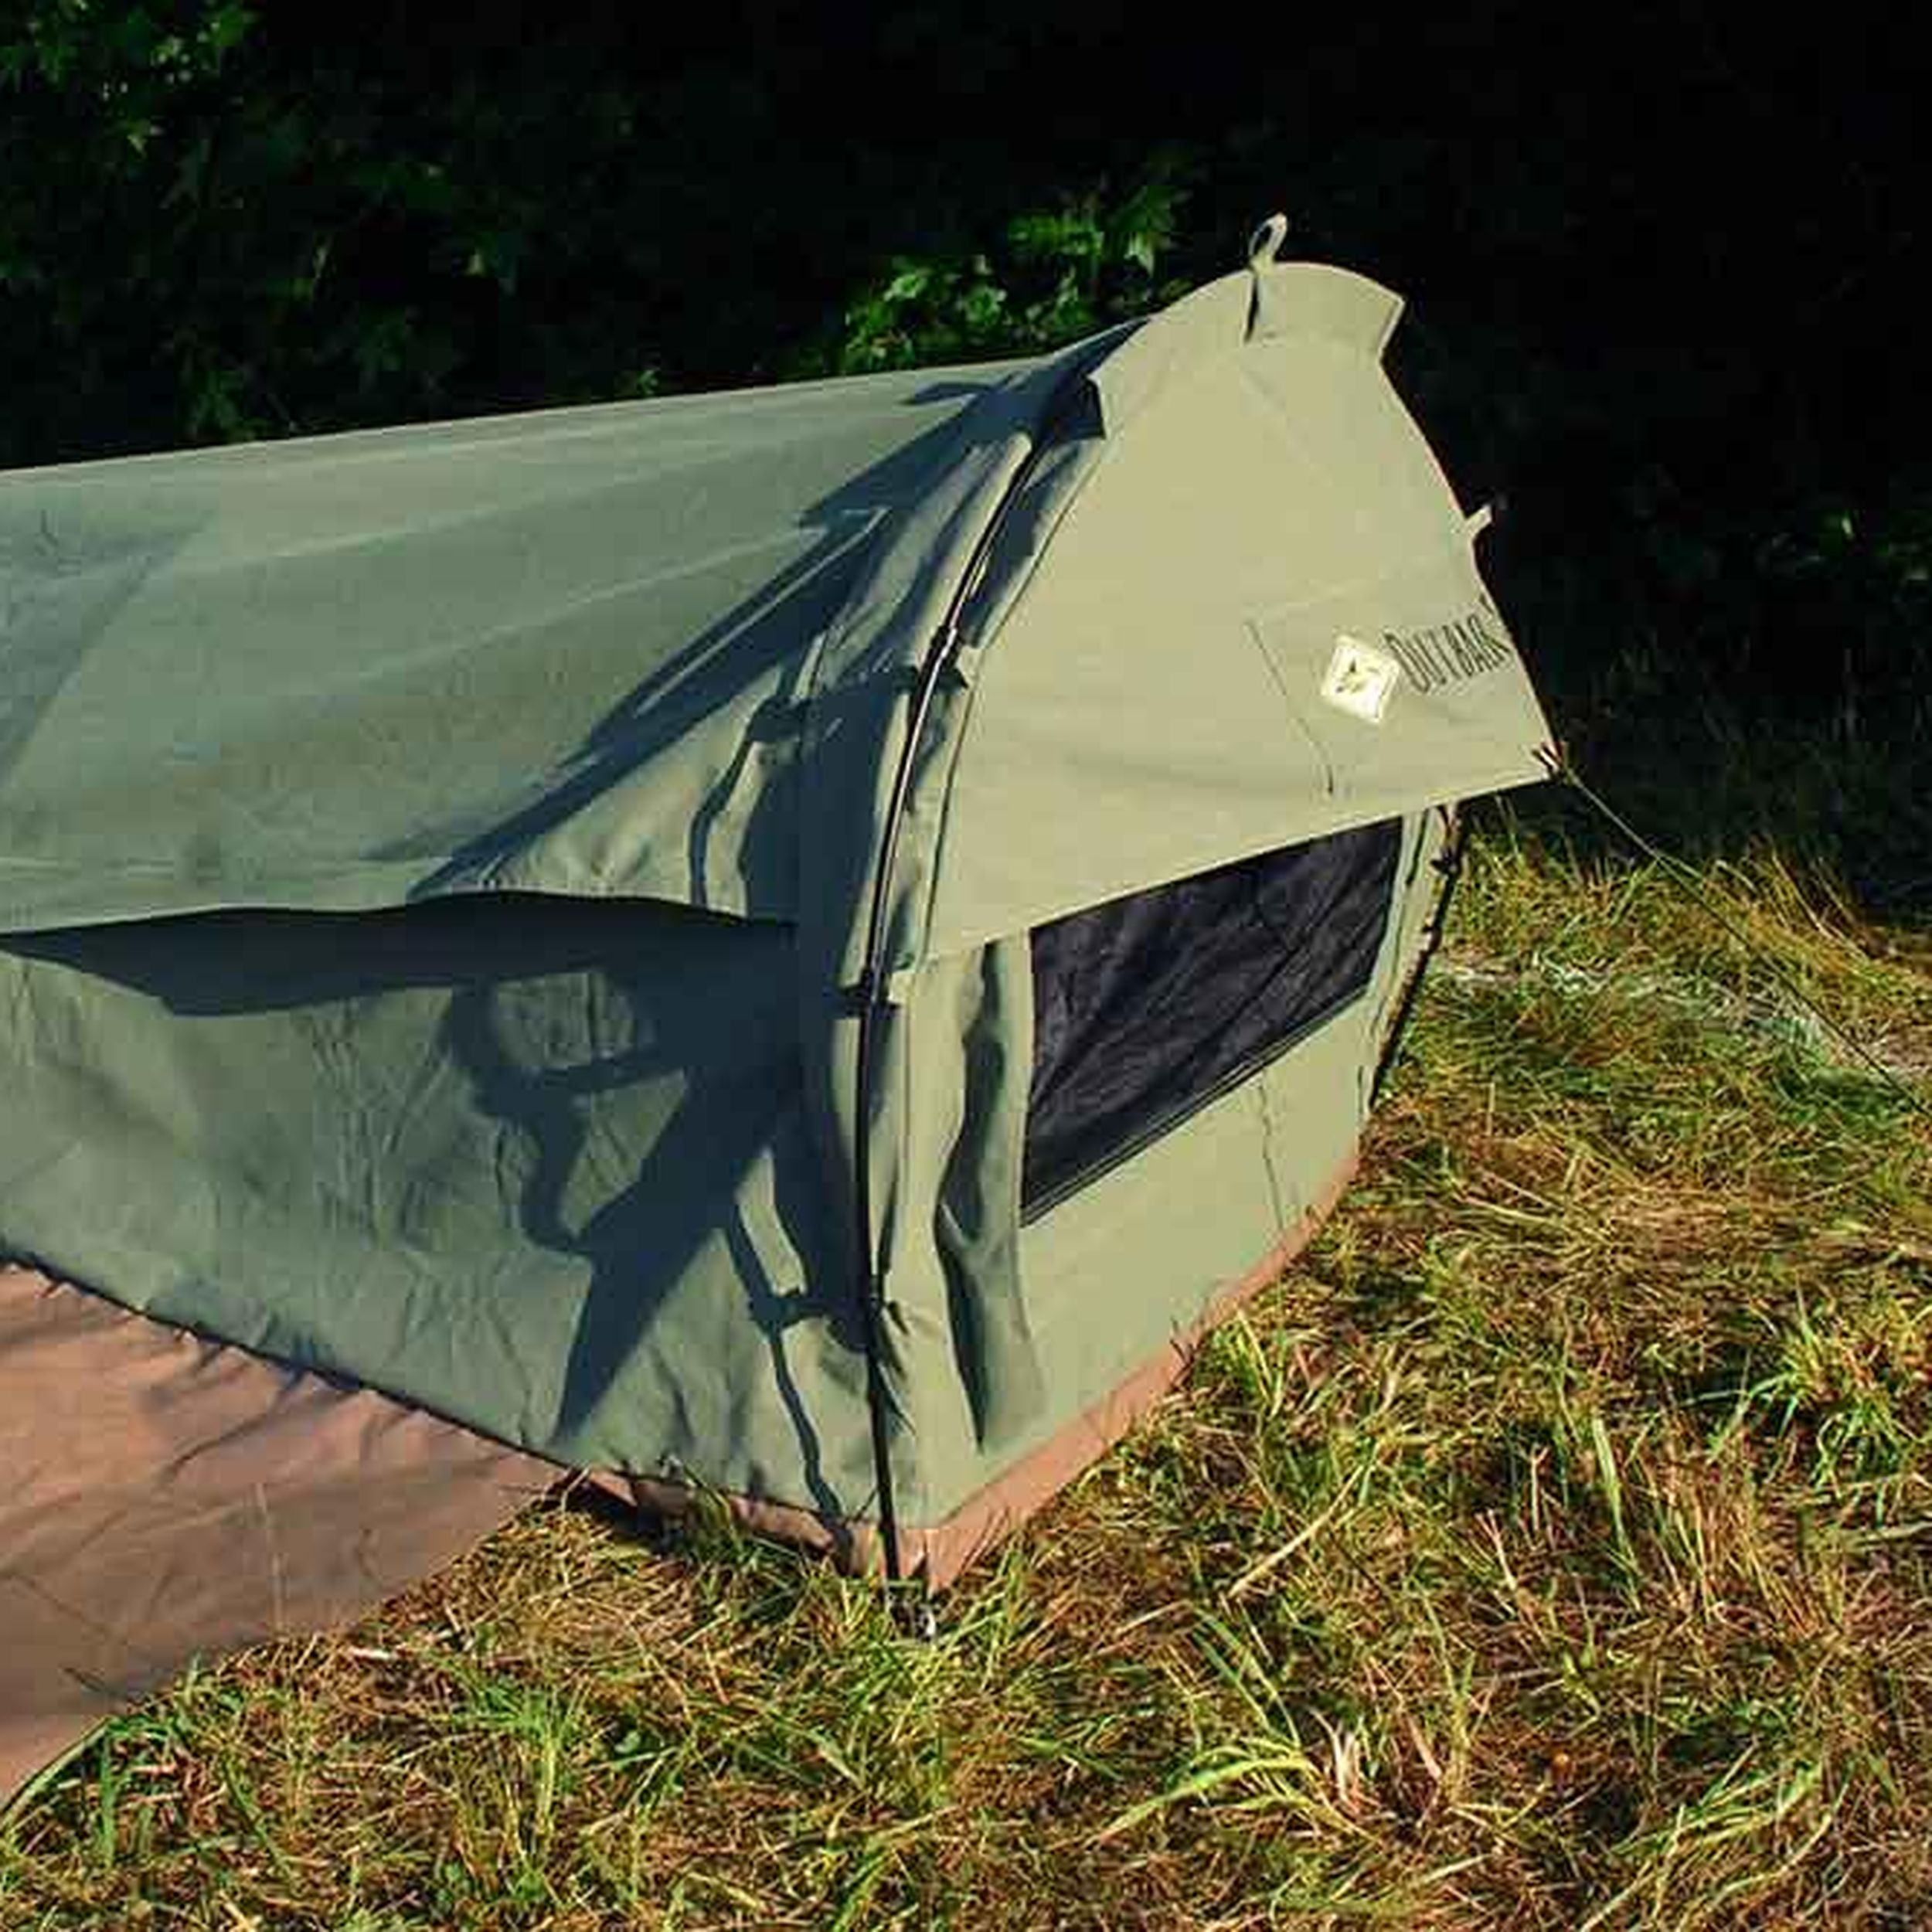 Junkie: Canvas tent bombproof, one of kind | The Spokesman-Review